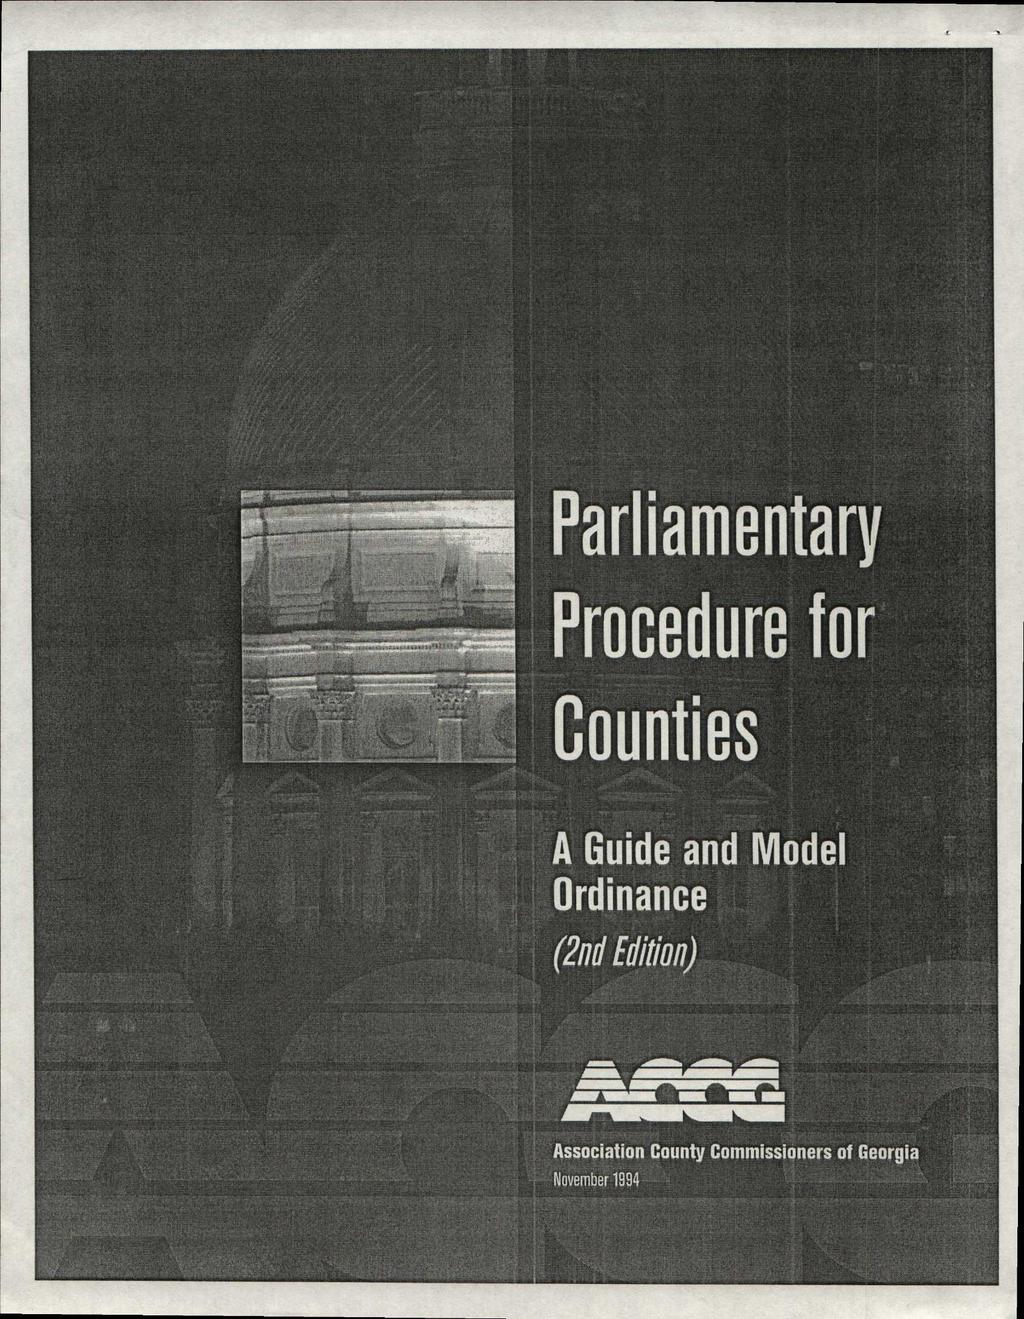 Parliamentary Procedure for Counties A Guide and Model Ordinance (2nd Edition) MINIM 411/